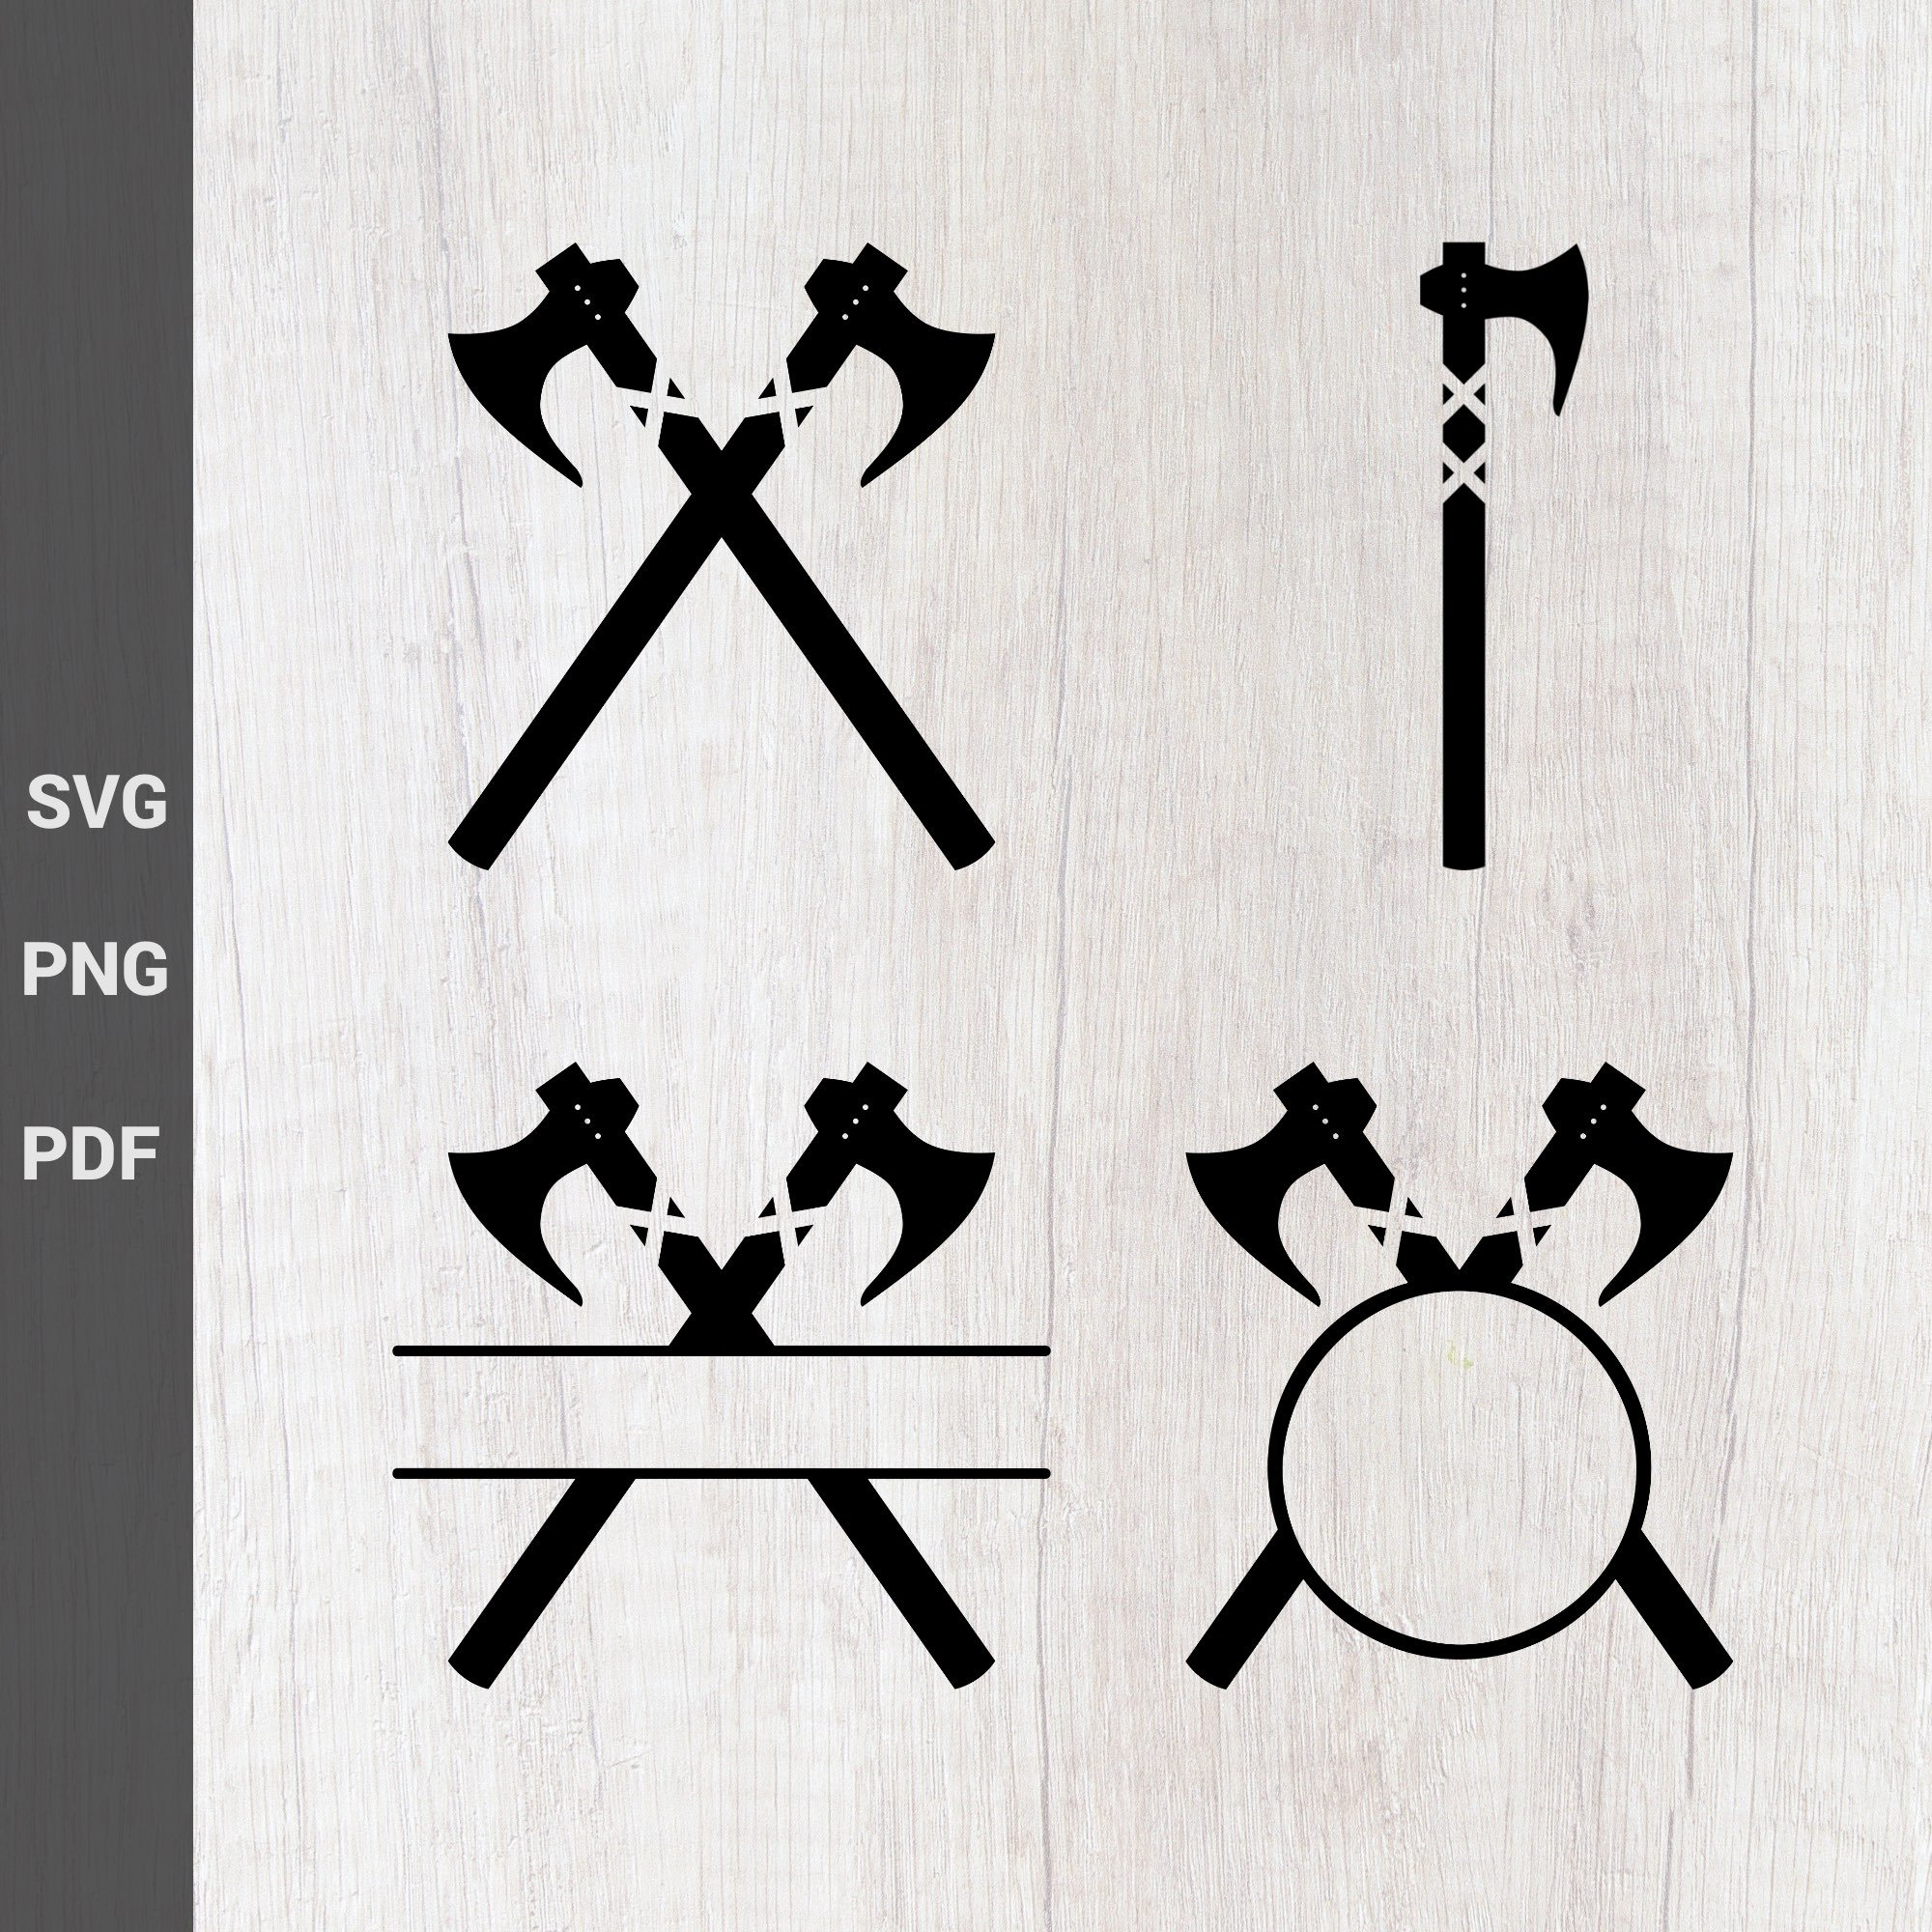 Lumber tools vector illustration crossed axes saw and woodwork text  lumberjack job or craft concept for labels or tattoo  CanStock